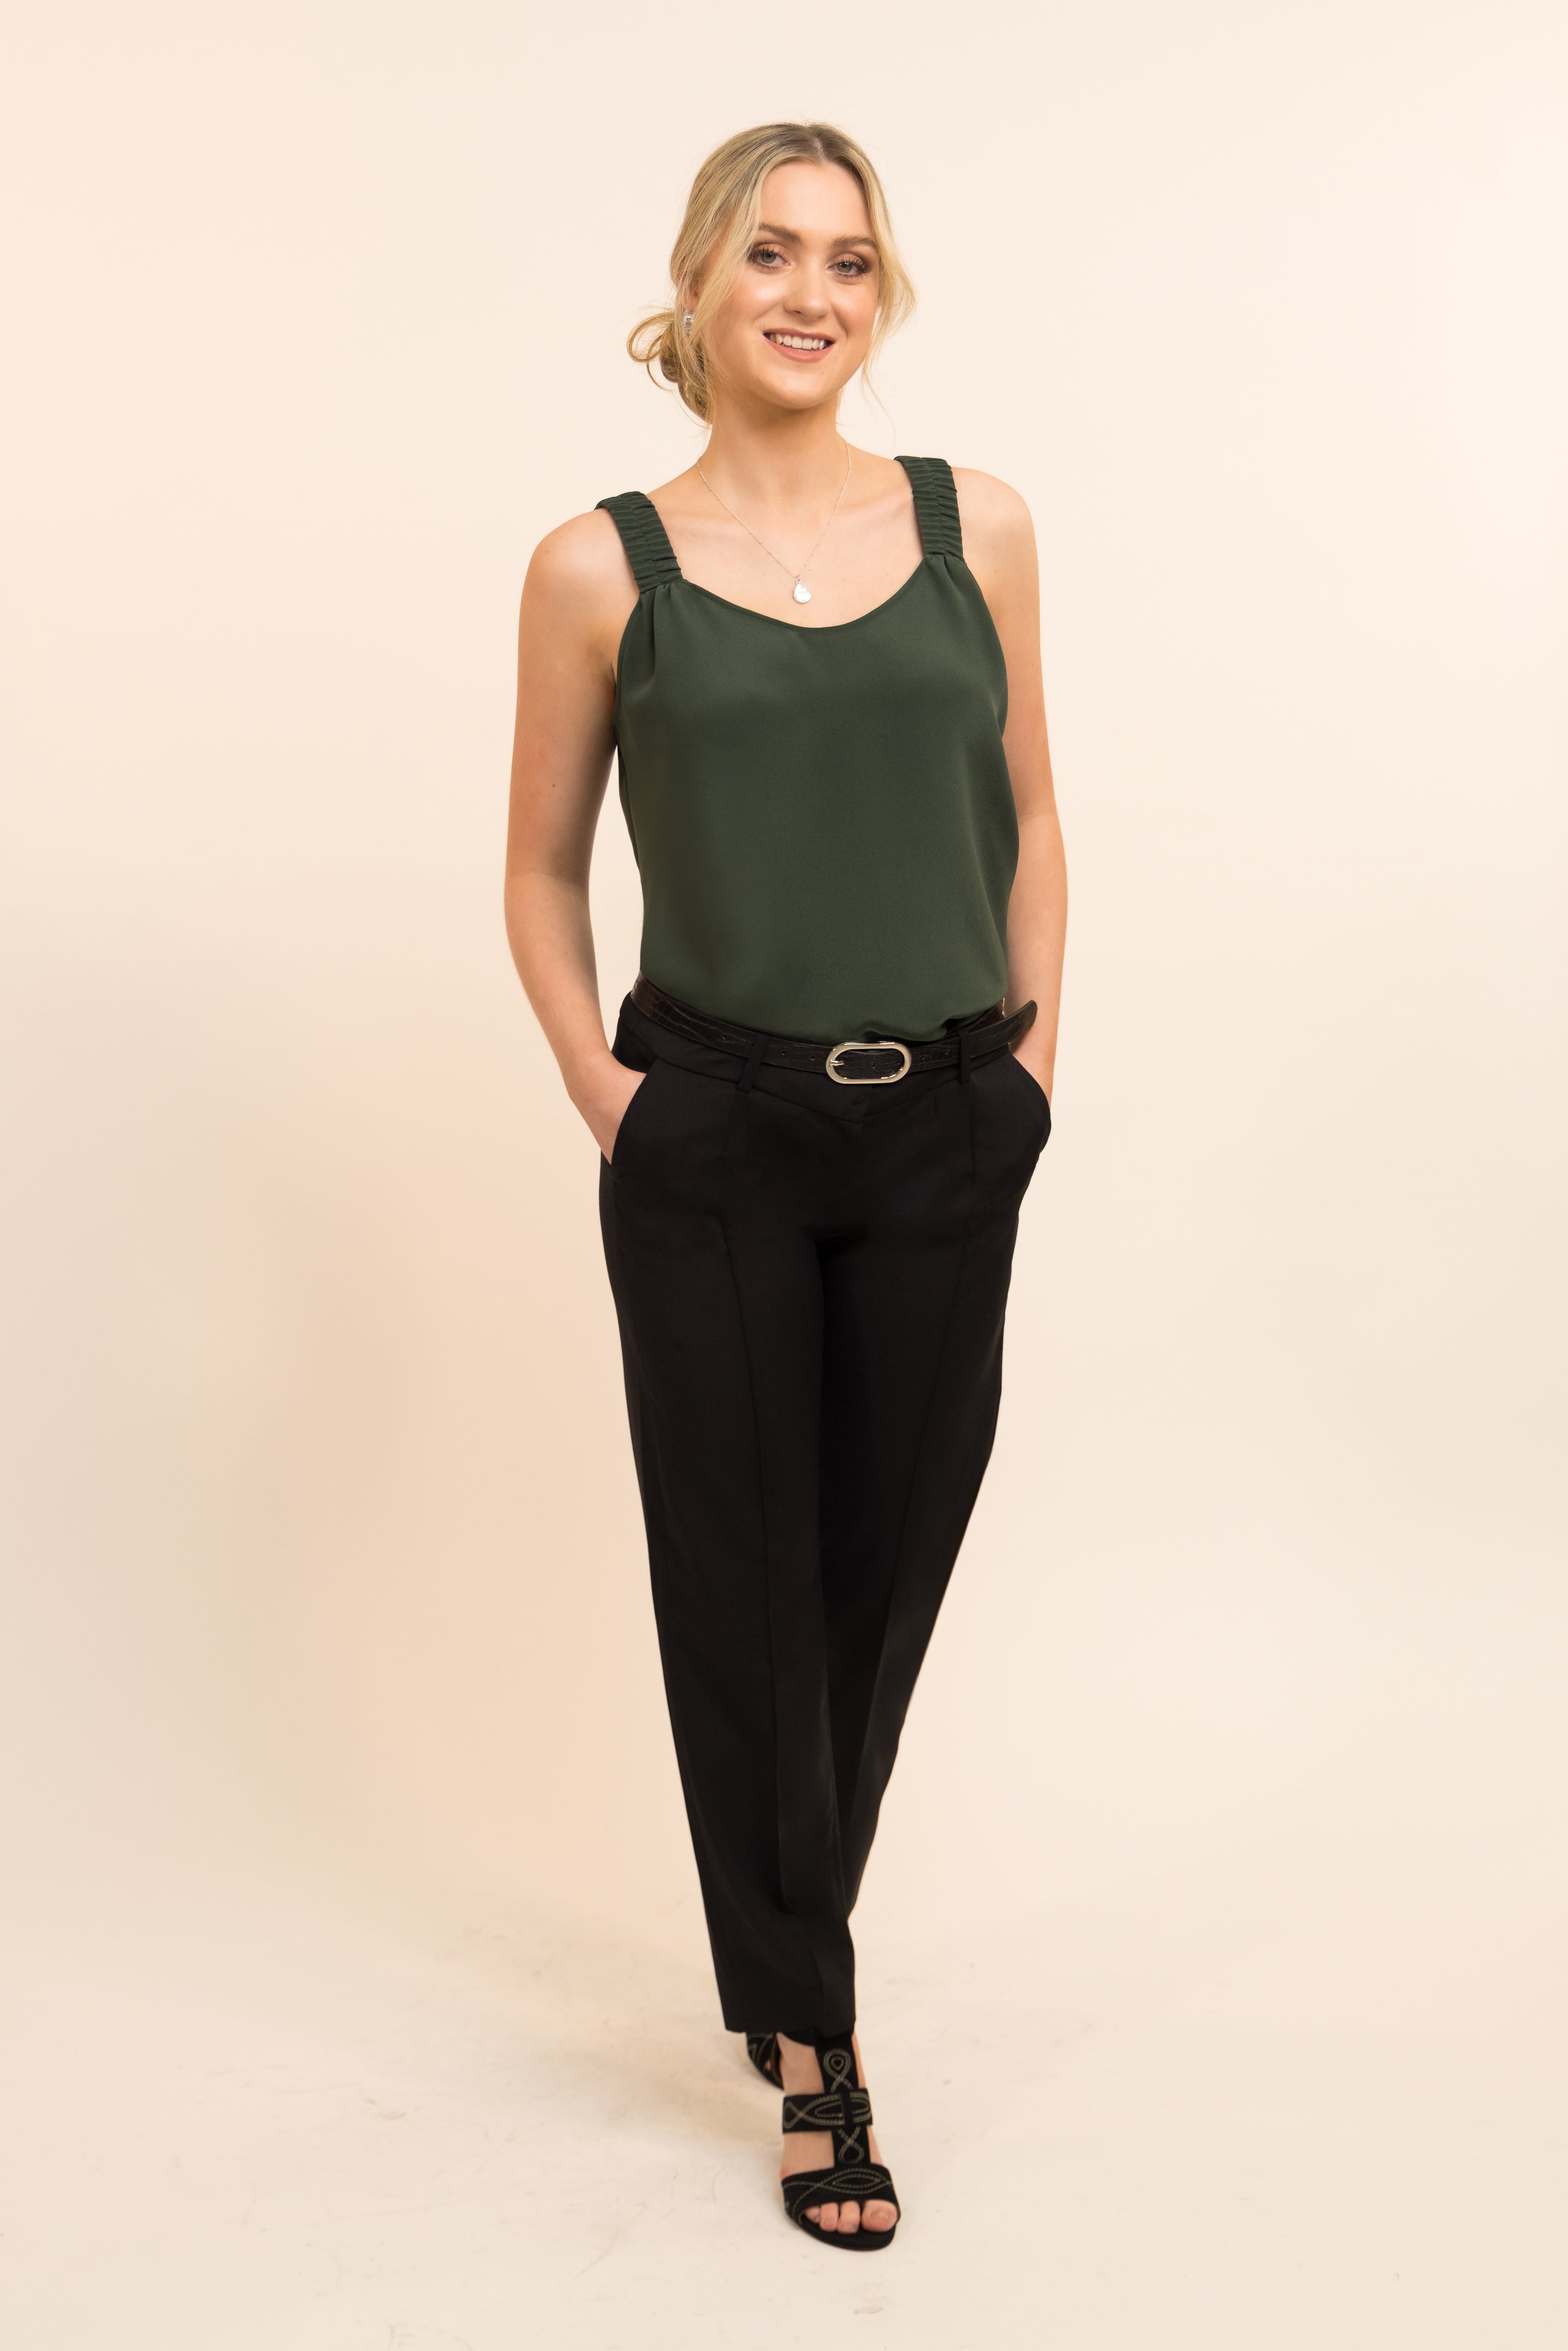 Green Camisole Top